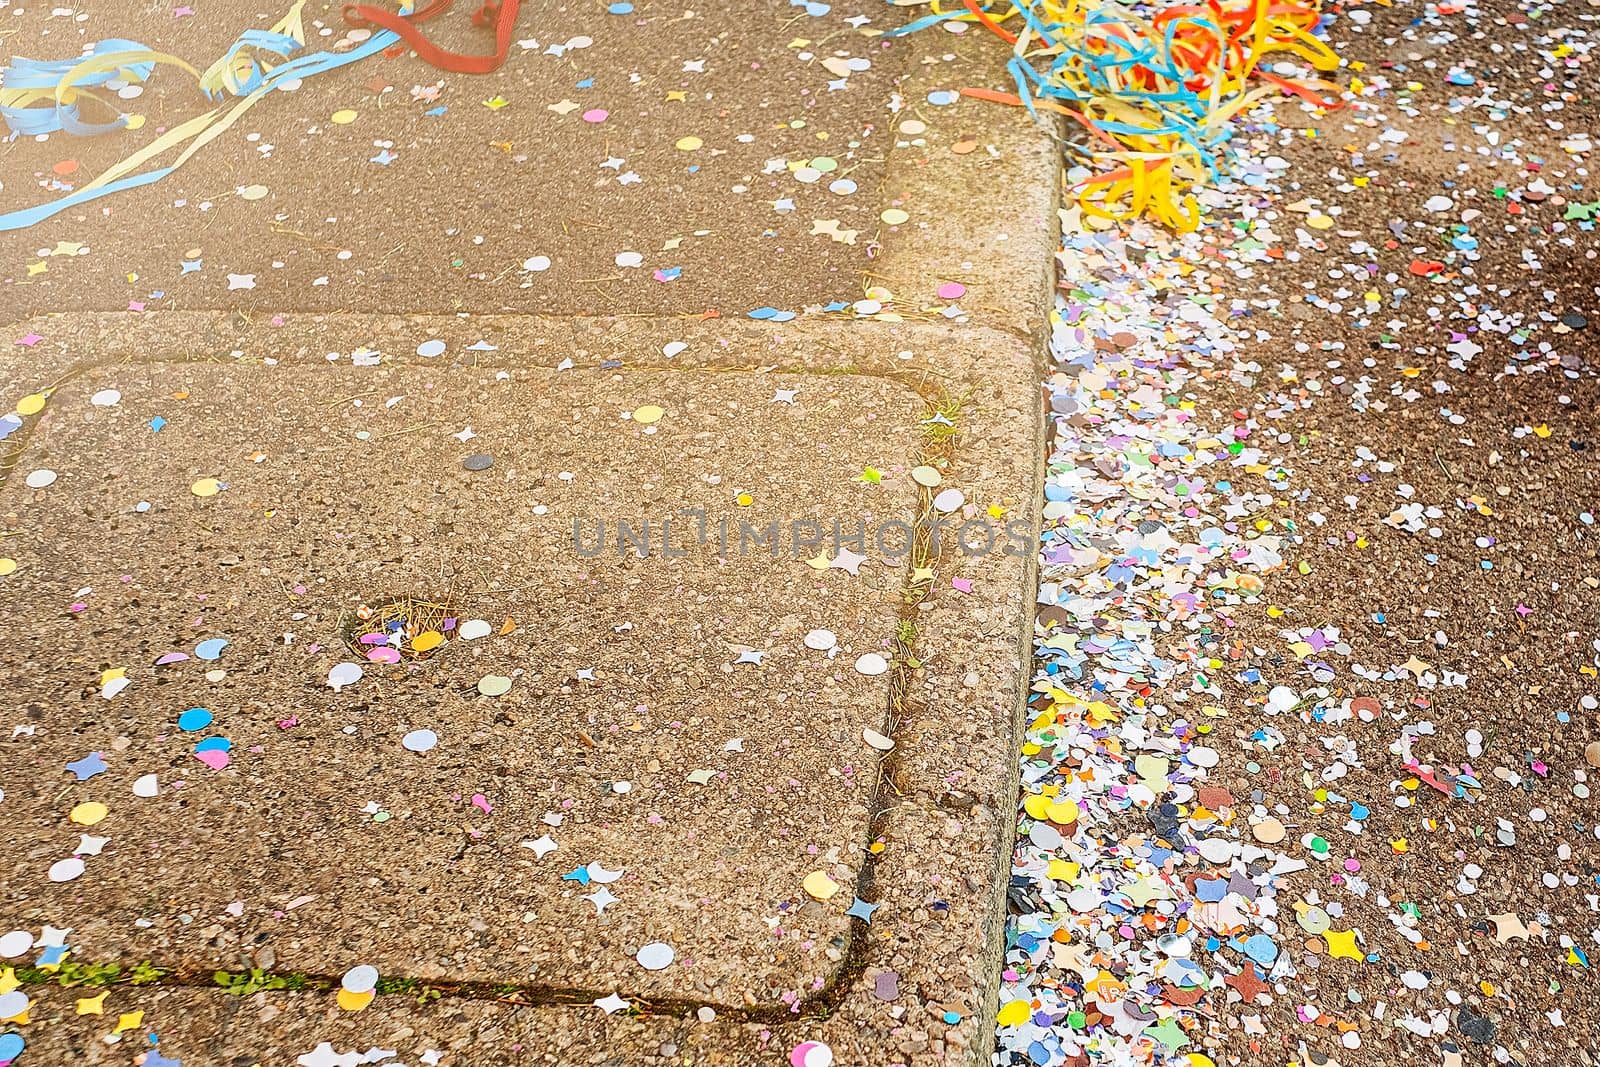 Colorful confetti and streamers at the street after Carnival parade. Italy